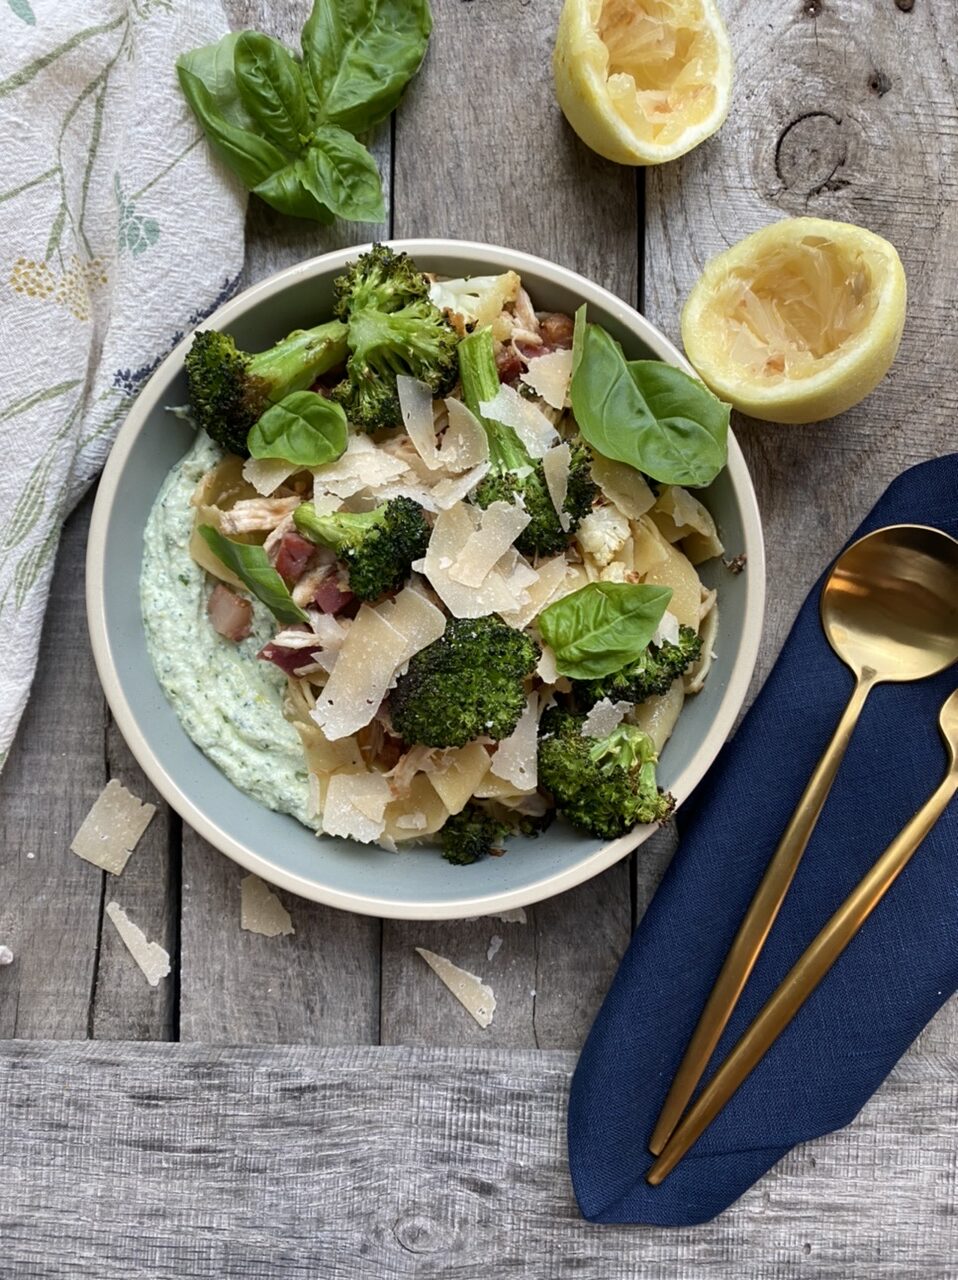 92753EB0 23ED 4313 84E3 580AE9505659 e1622650834360 - Browned Butter Pappardelle Chicken with Pancetta & Roast Broccoli on Herbed Whipped Ricotta